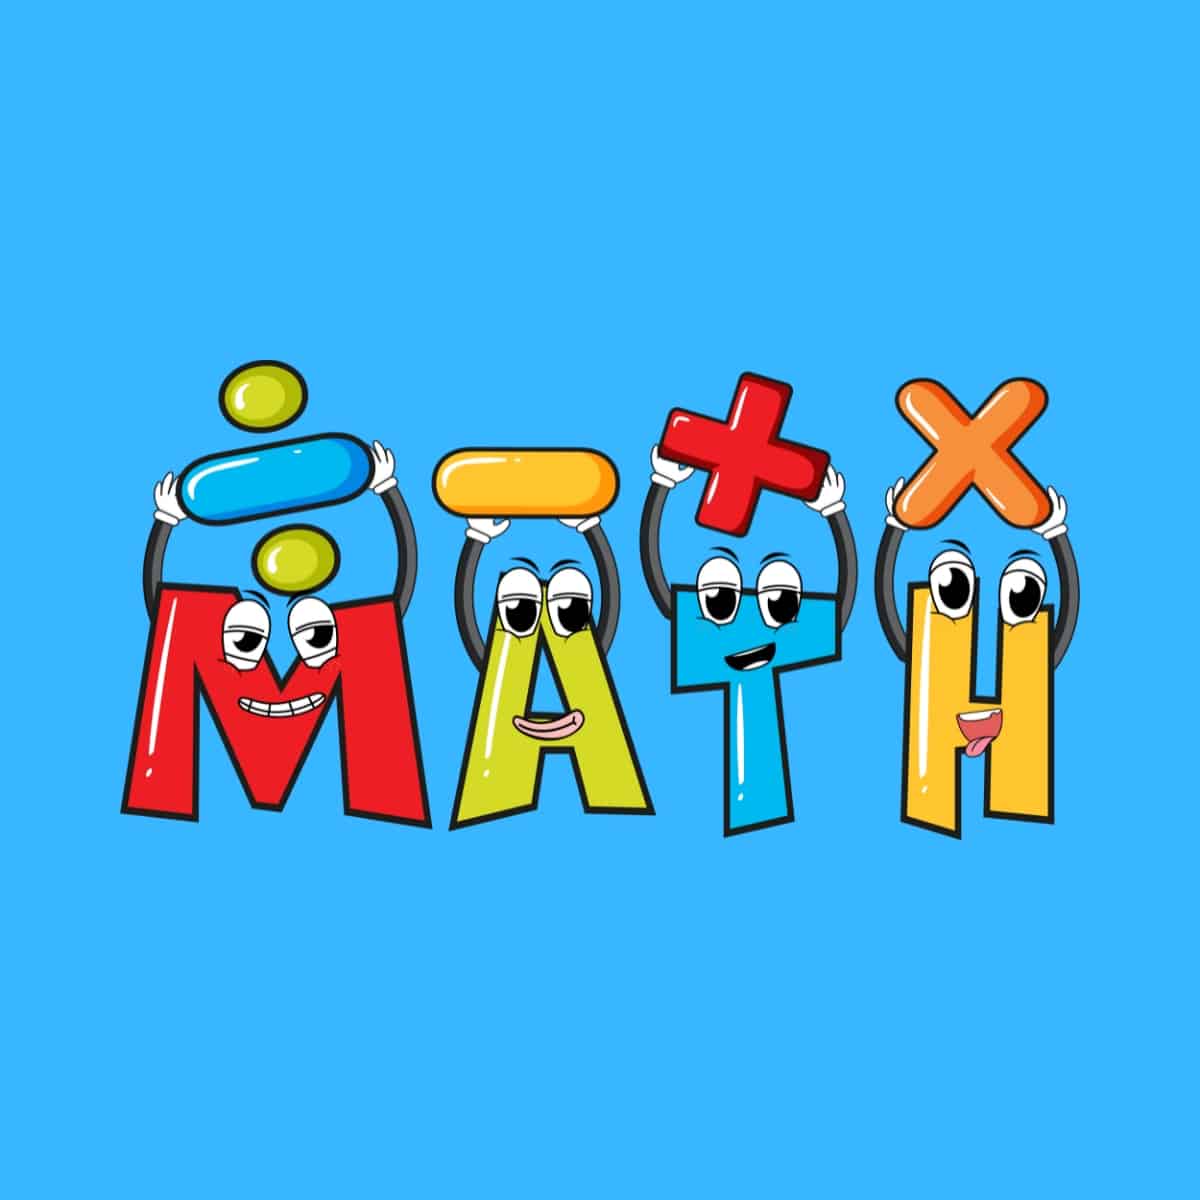 Cartoon graphic of the word math spelled out with the letter having faces on them a on a blue background.